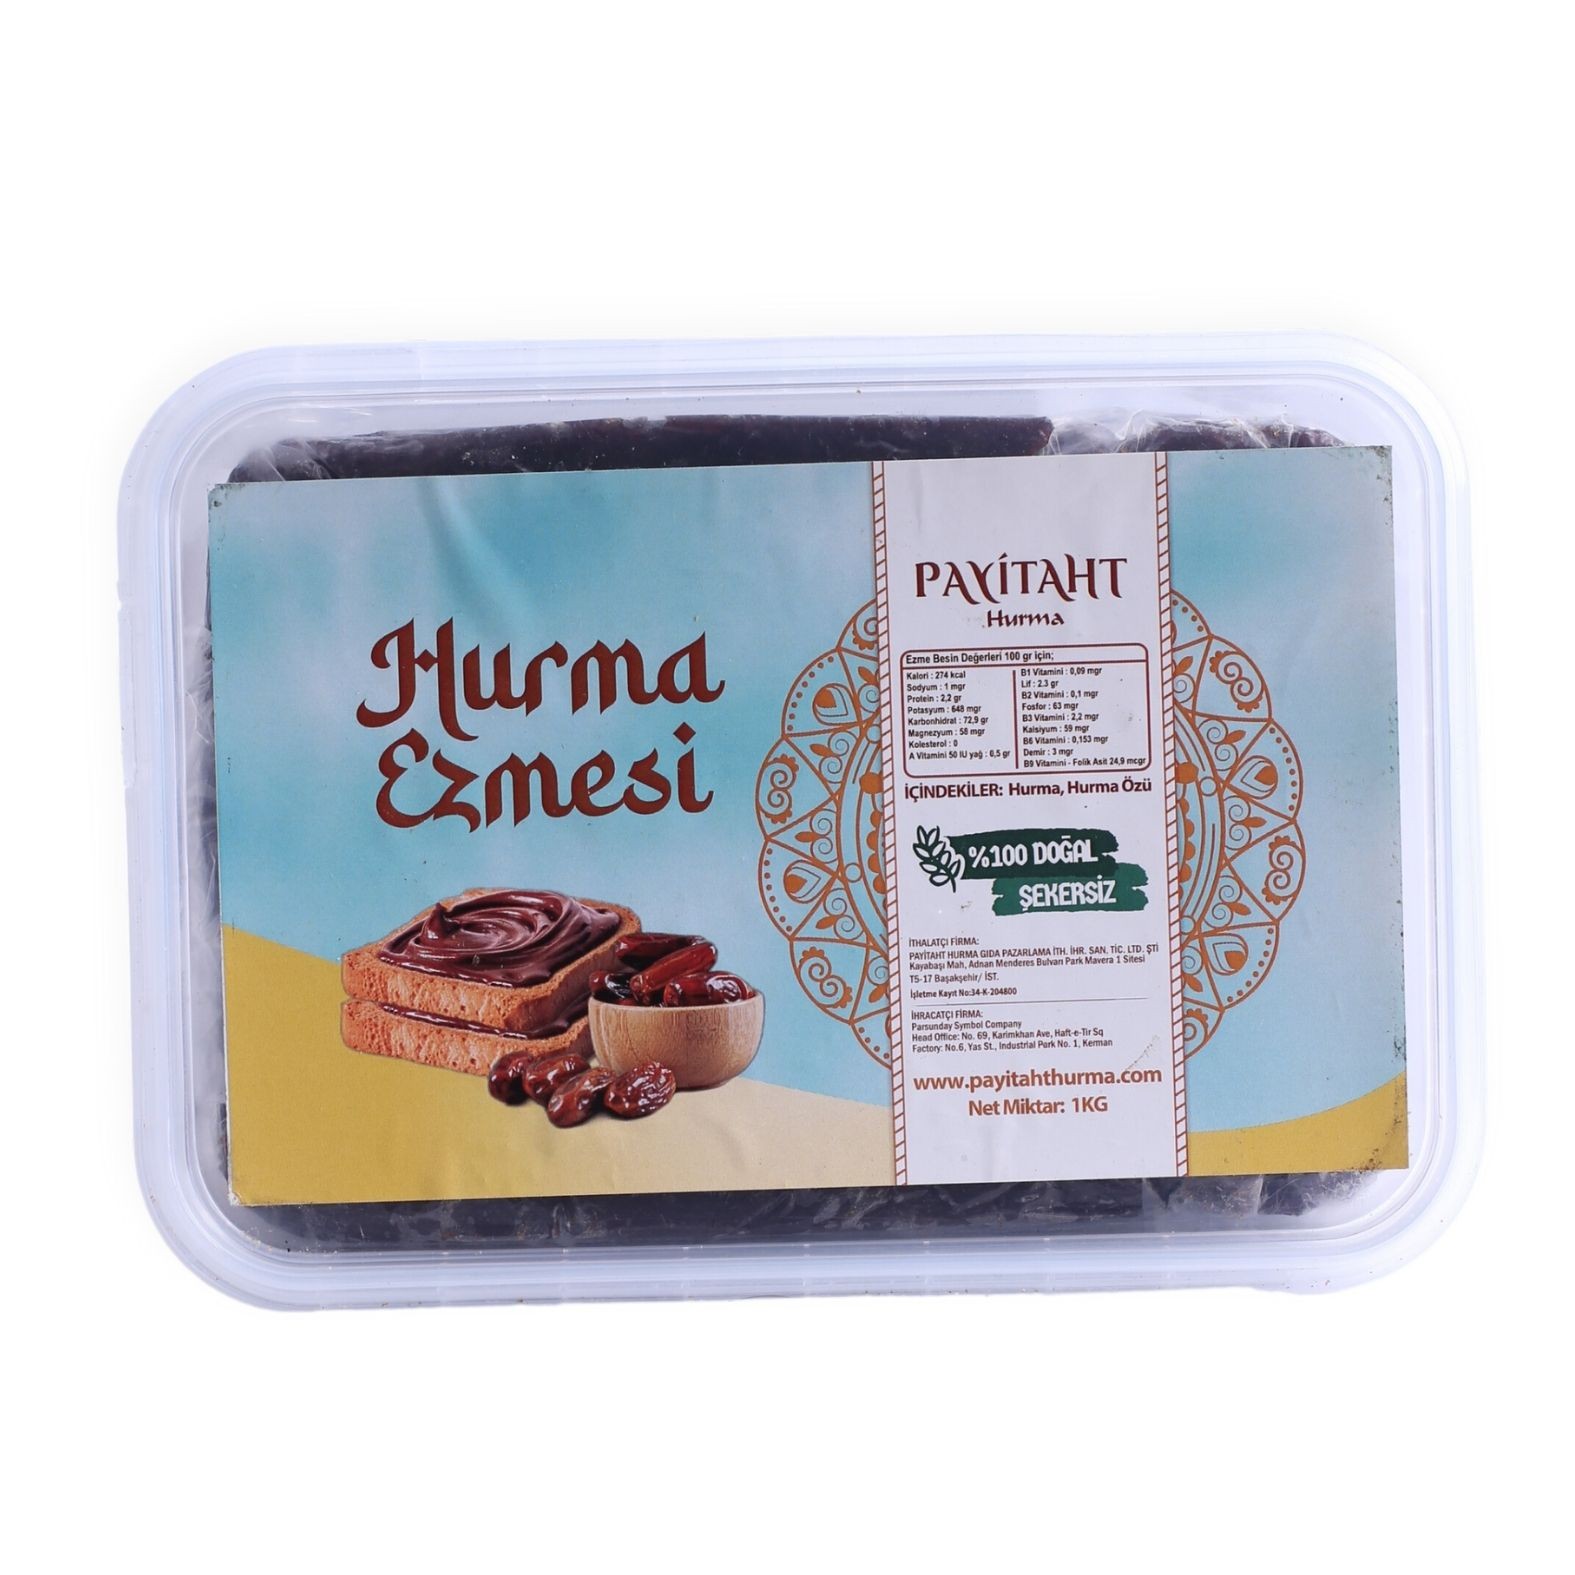 PAYITAH DATE PASTE UNSWEETENED 1 KG 5 PACKAGE